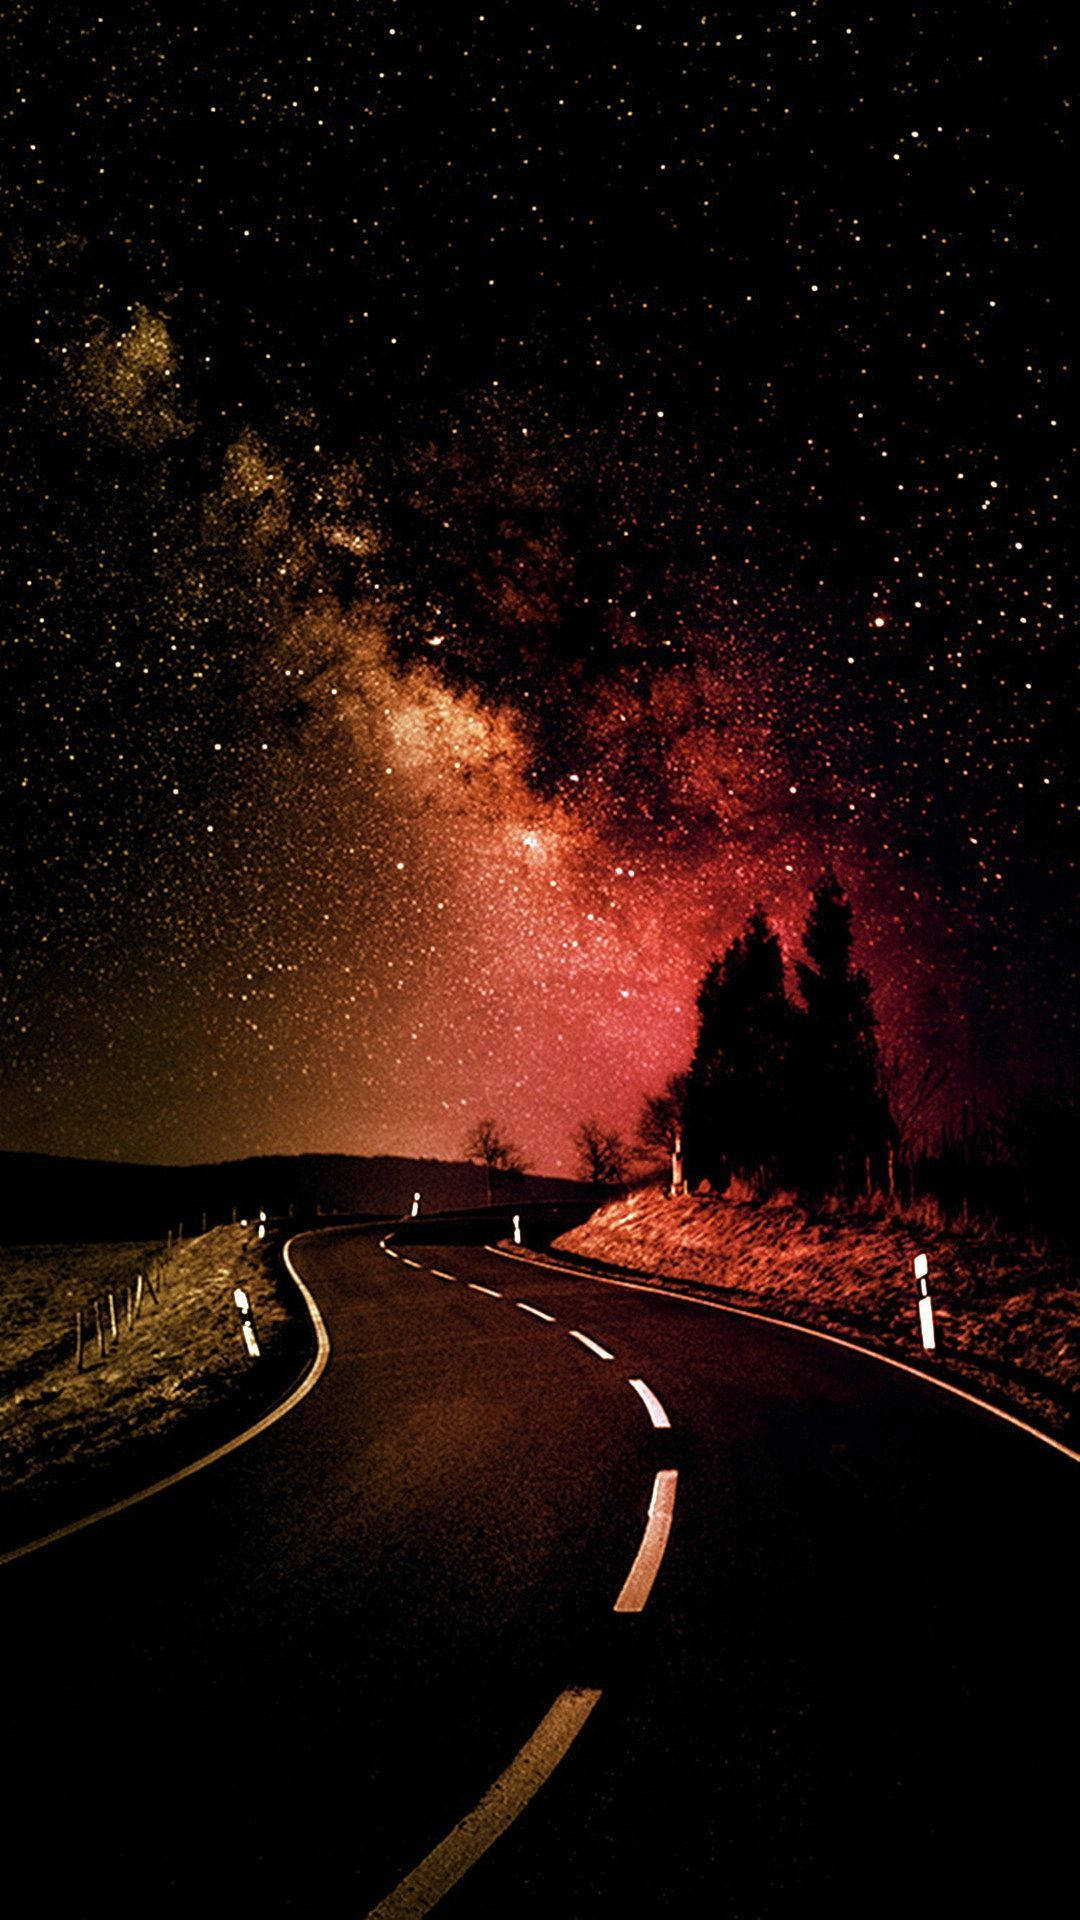 1080x1920 Download Hd Road Under The Pink Galaxy Wallpaper